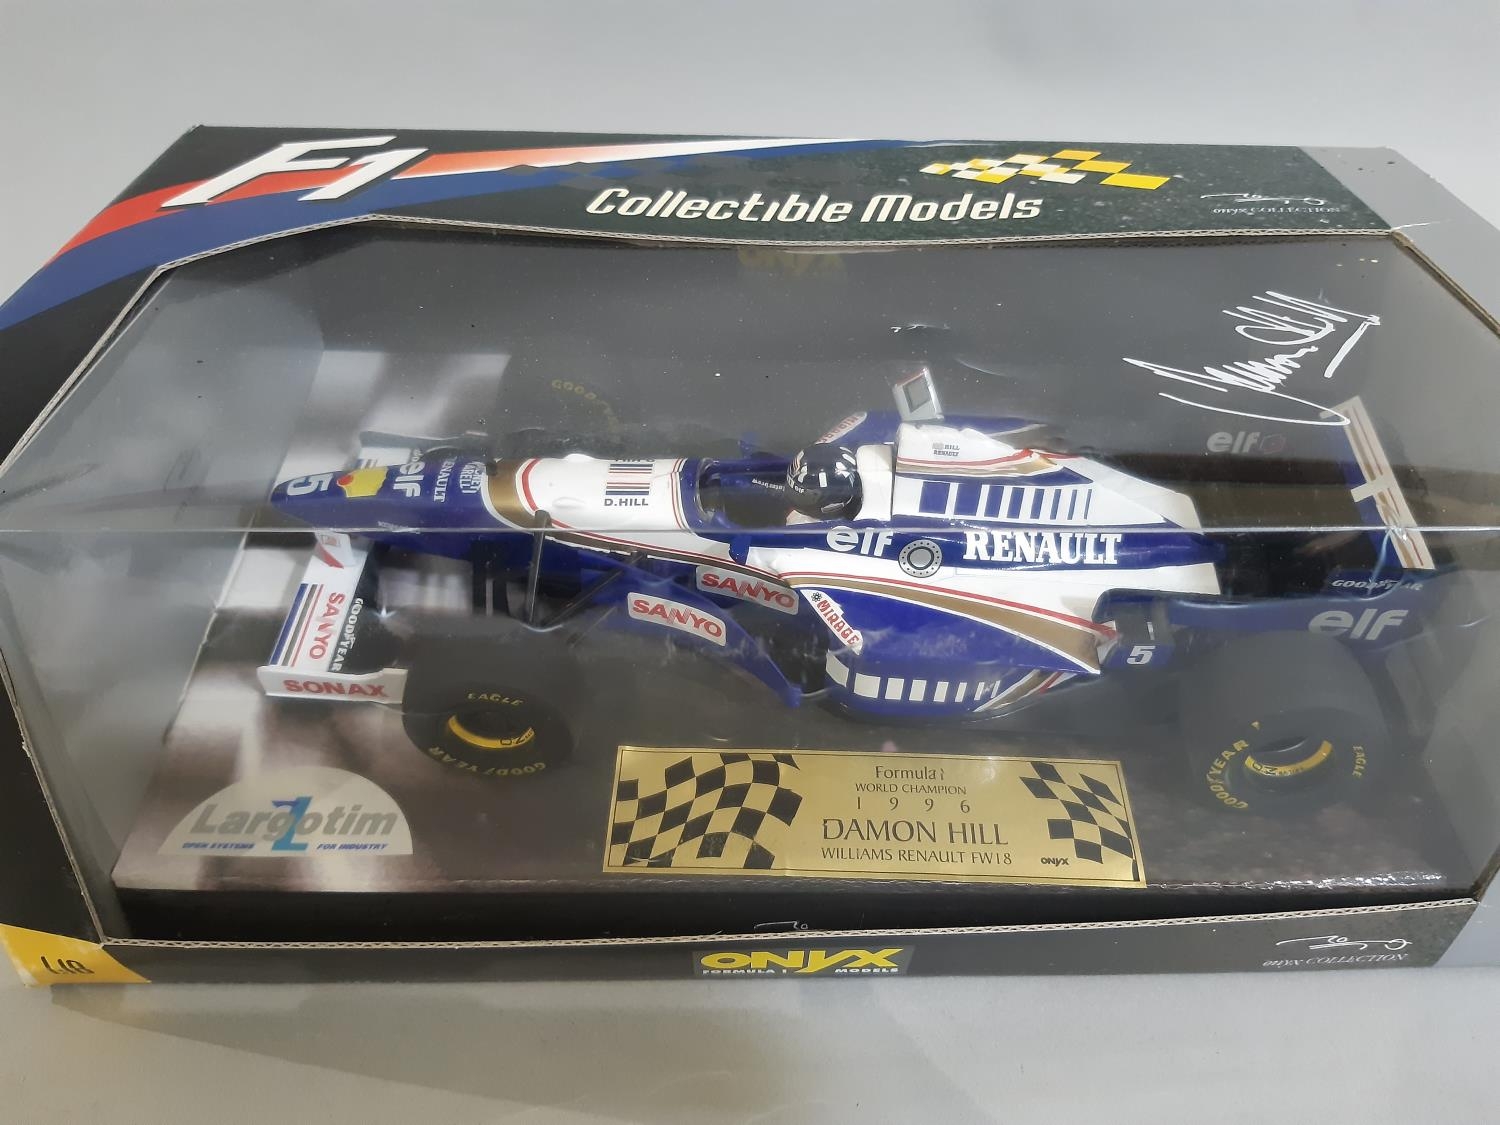 Mixed lot of a boxed Formula 1 racing car by Onyx ref 6007 Williams Renault FW18 Damon Hill, 1:18 - Image 3 of 3